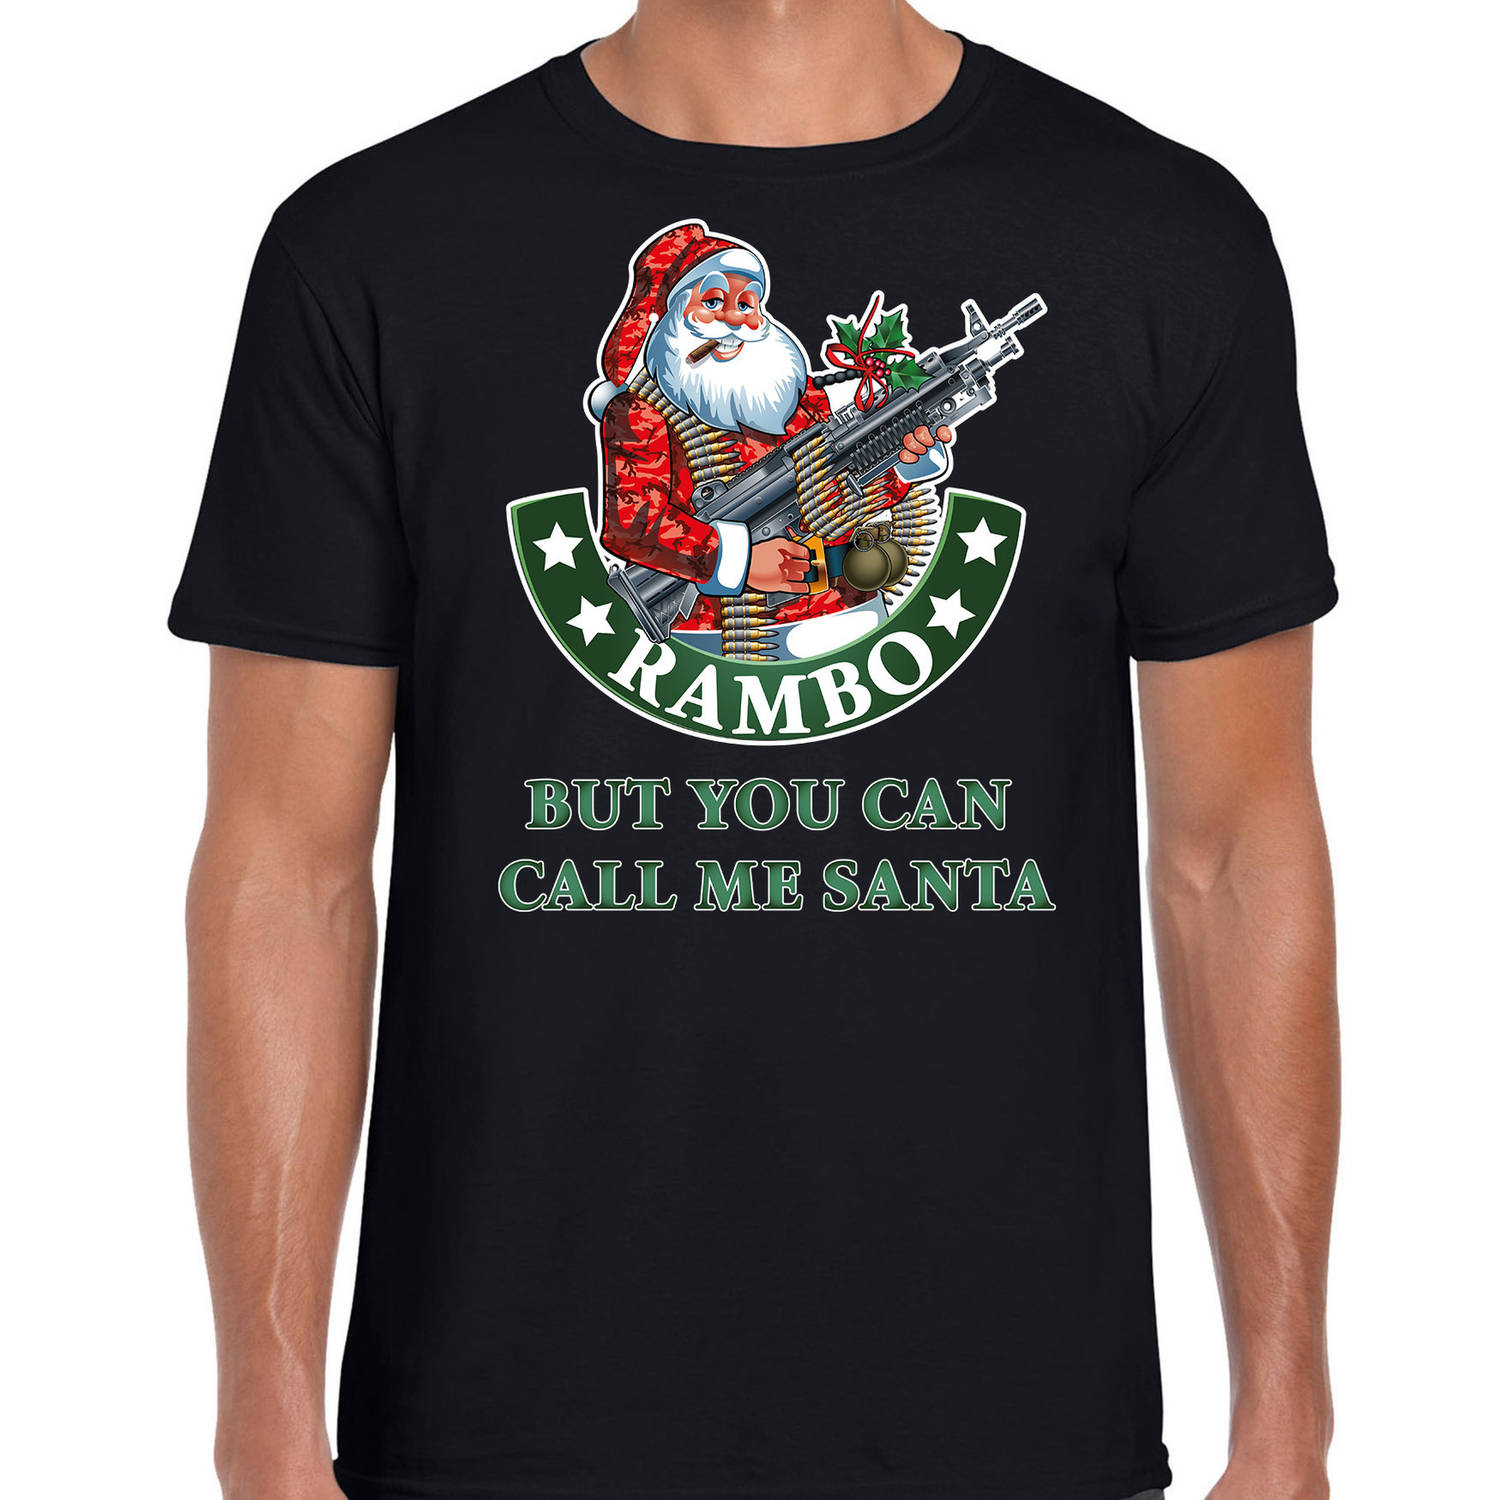 Fout Kerst t-shirt / Kerstkleding Rambo but you can call me Santa voor heren M - kerst t-shirts